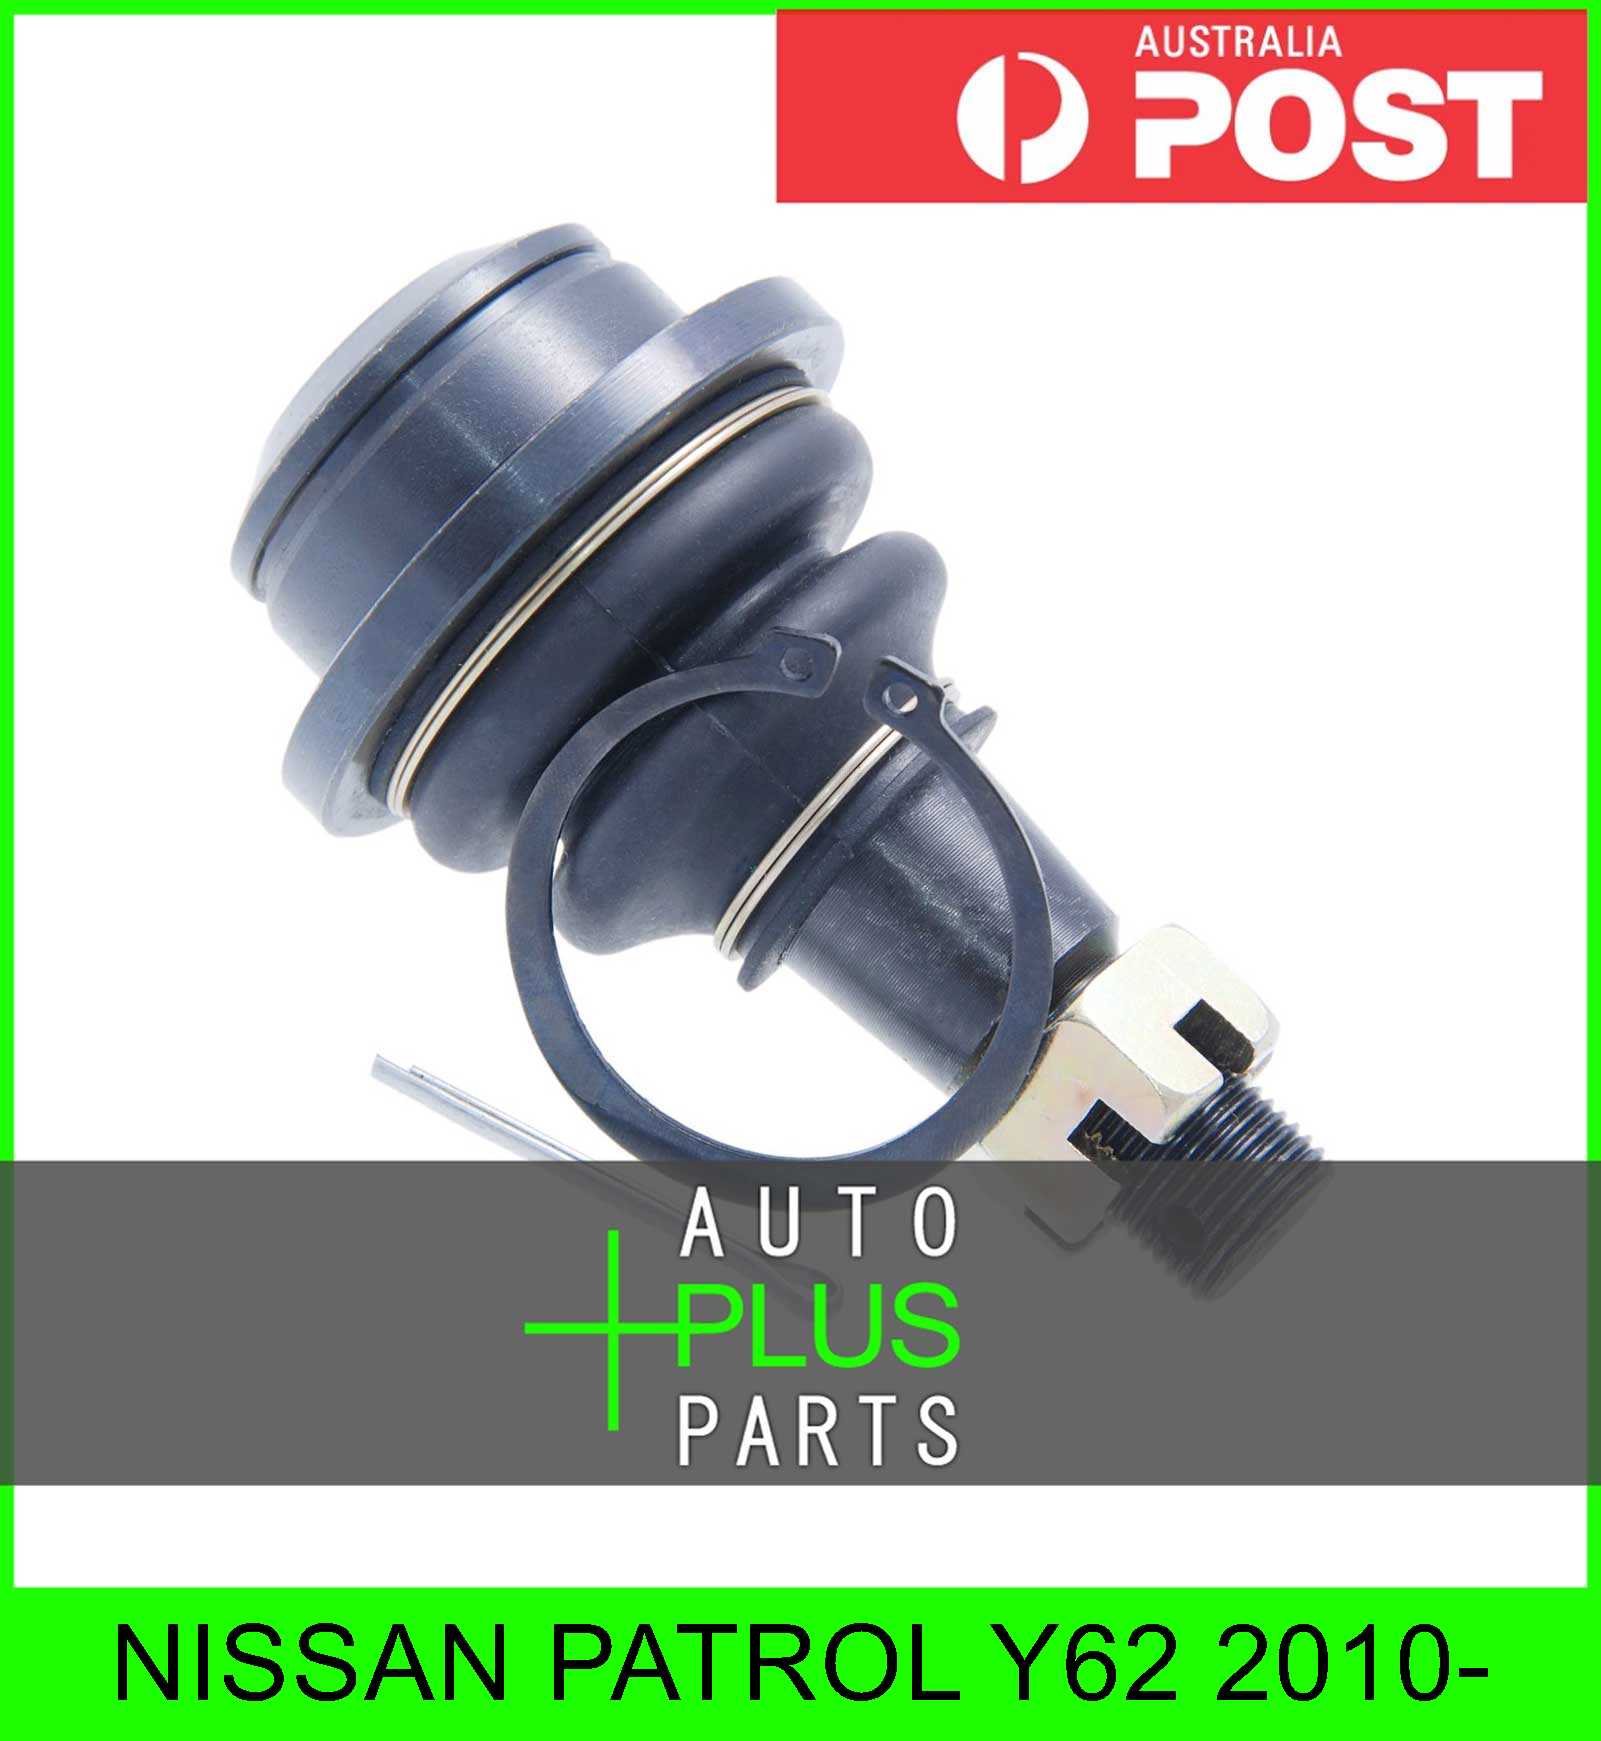 Fits NISSAN PATROL Y62 2010- - BALL JOINT FRONT LOWER ARM | eBay